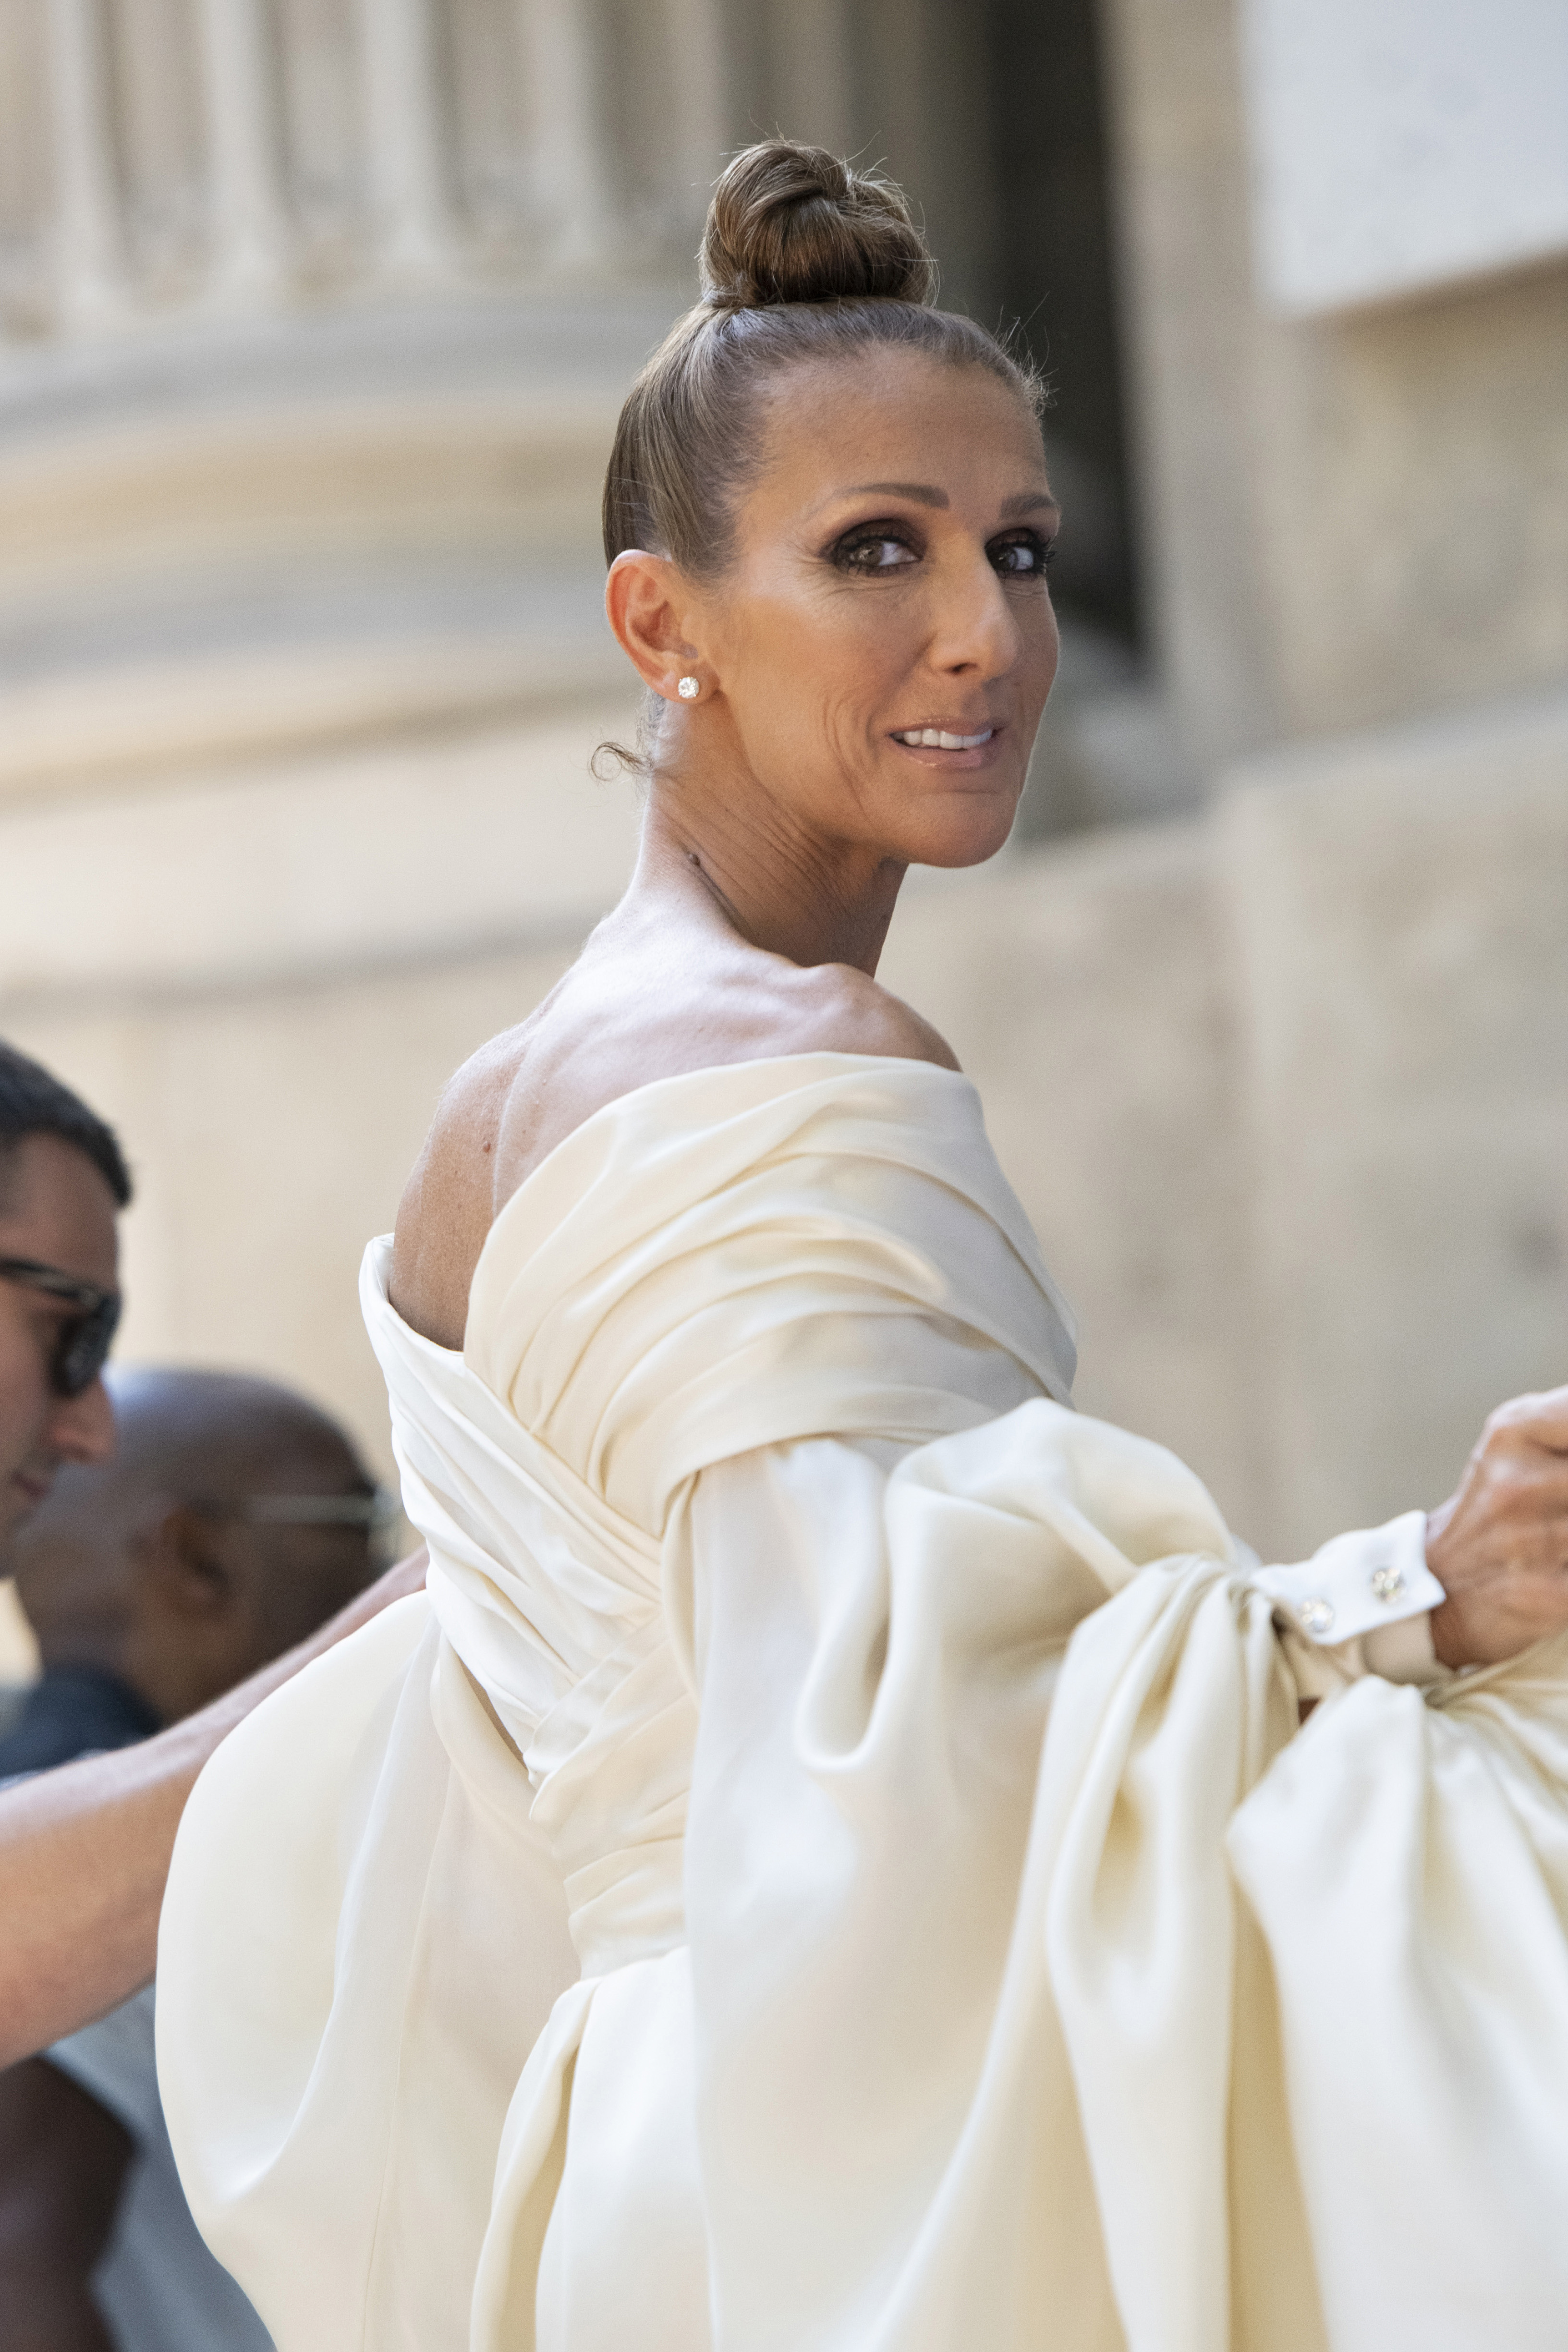 Celine Dion wears an Alexandre Vauthier dress in Paris, France, on July 2, 2019 | Source: Getty Images